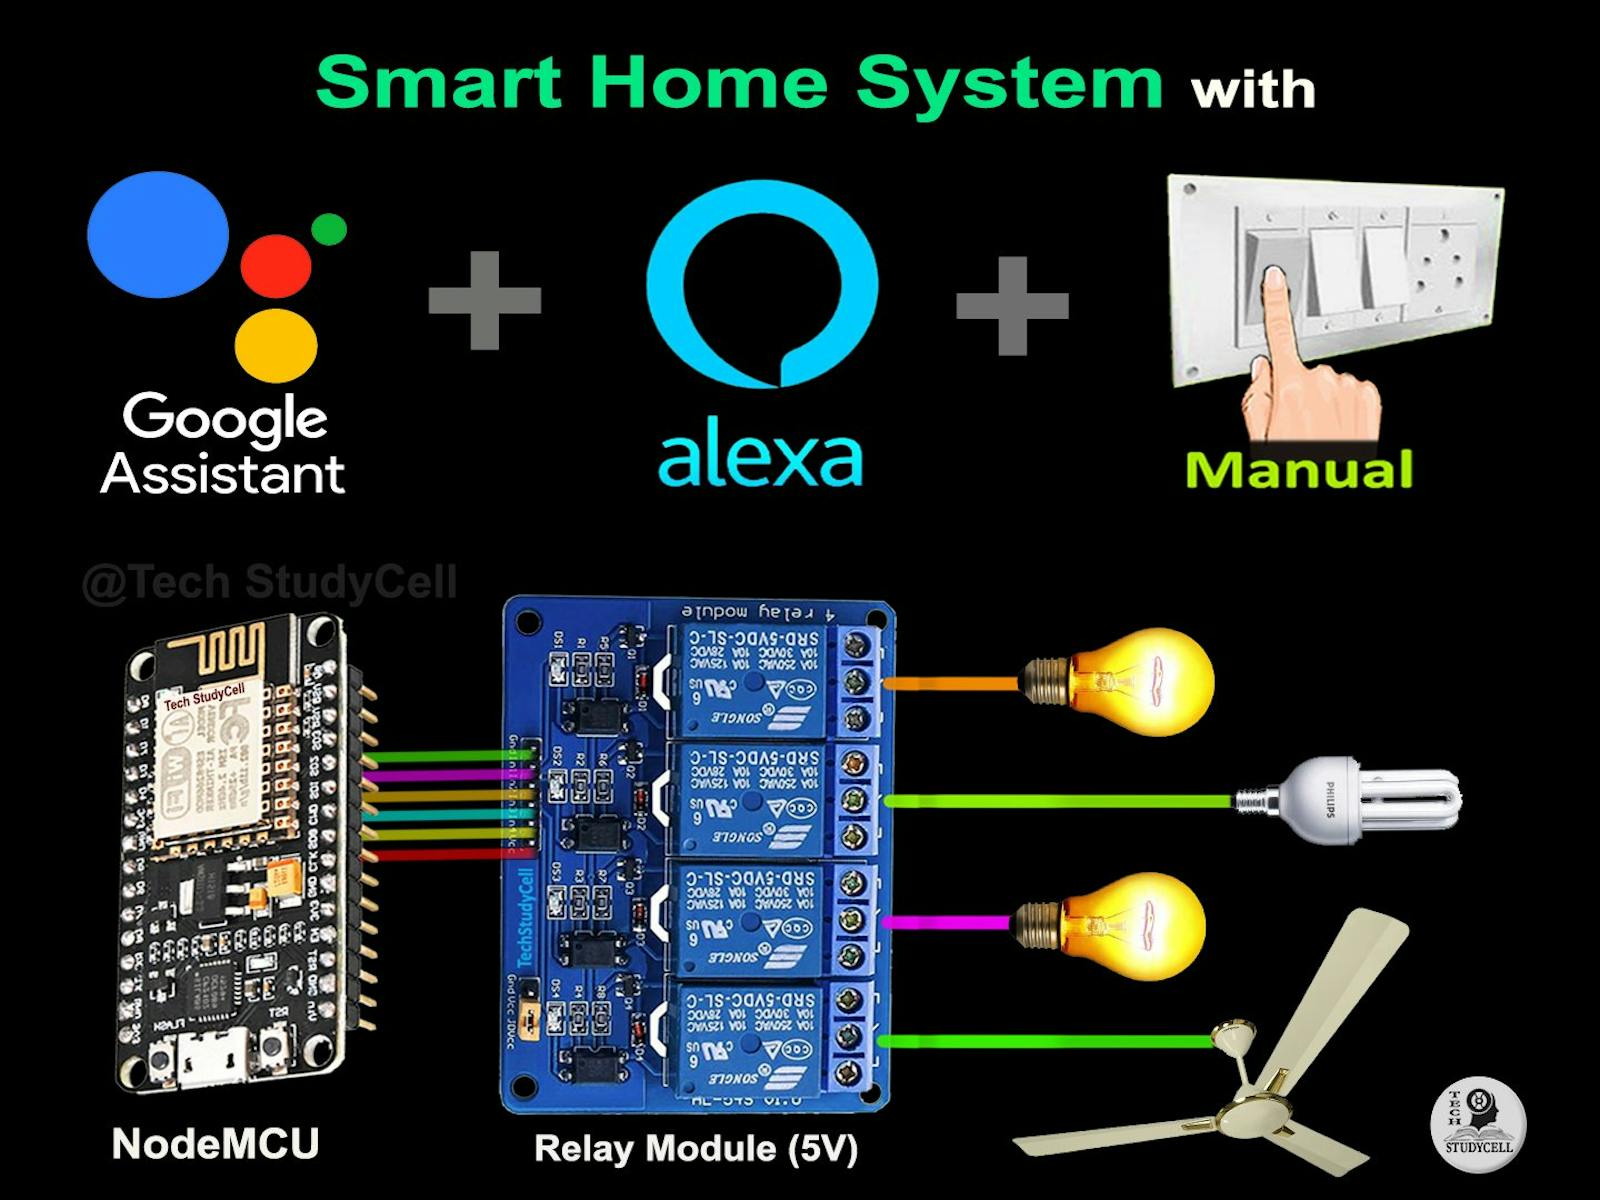 Smart home automation from Google